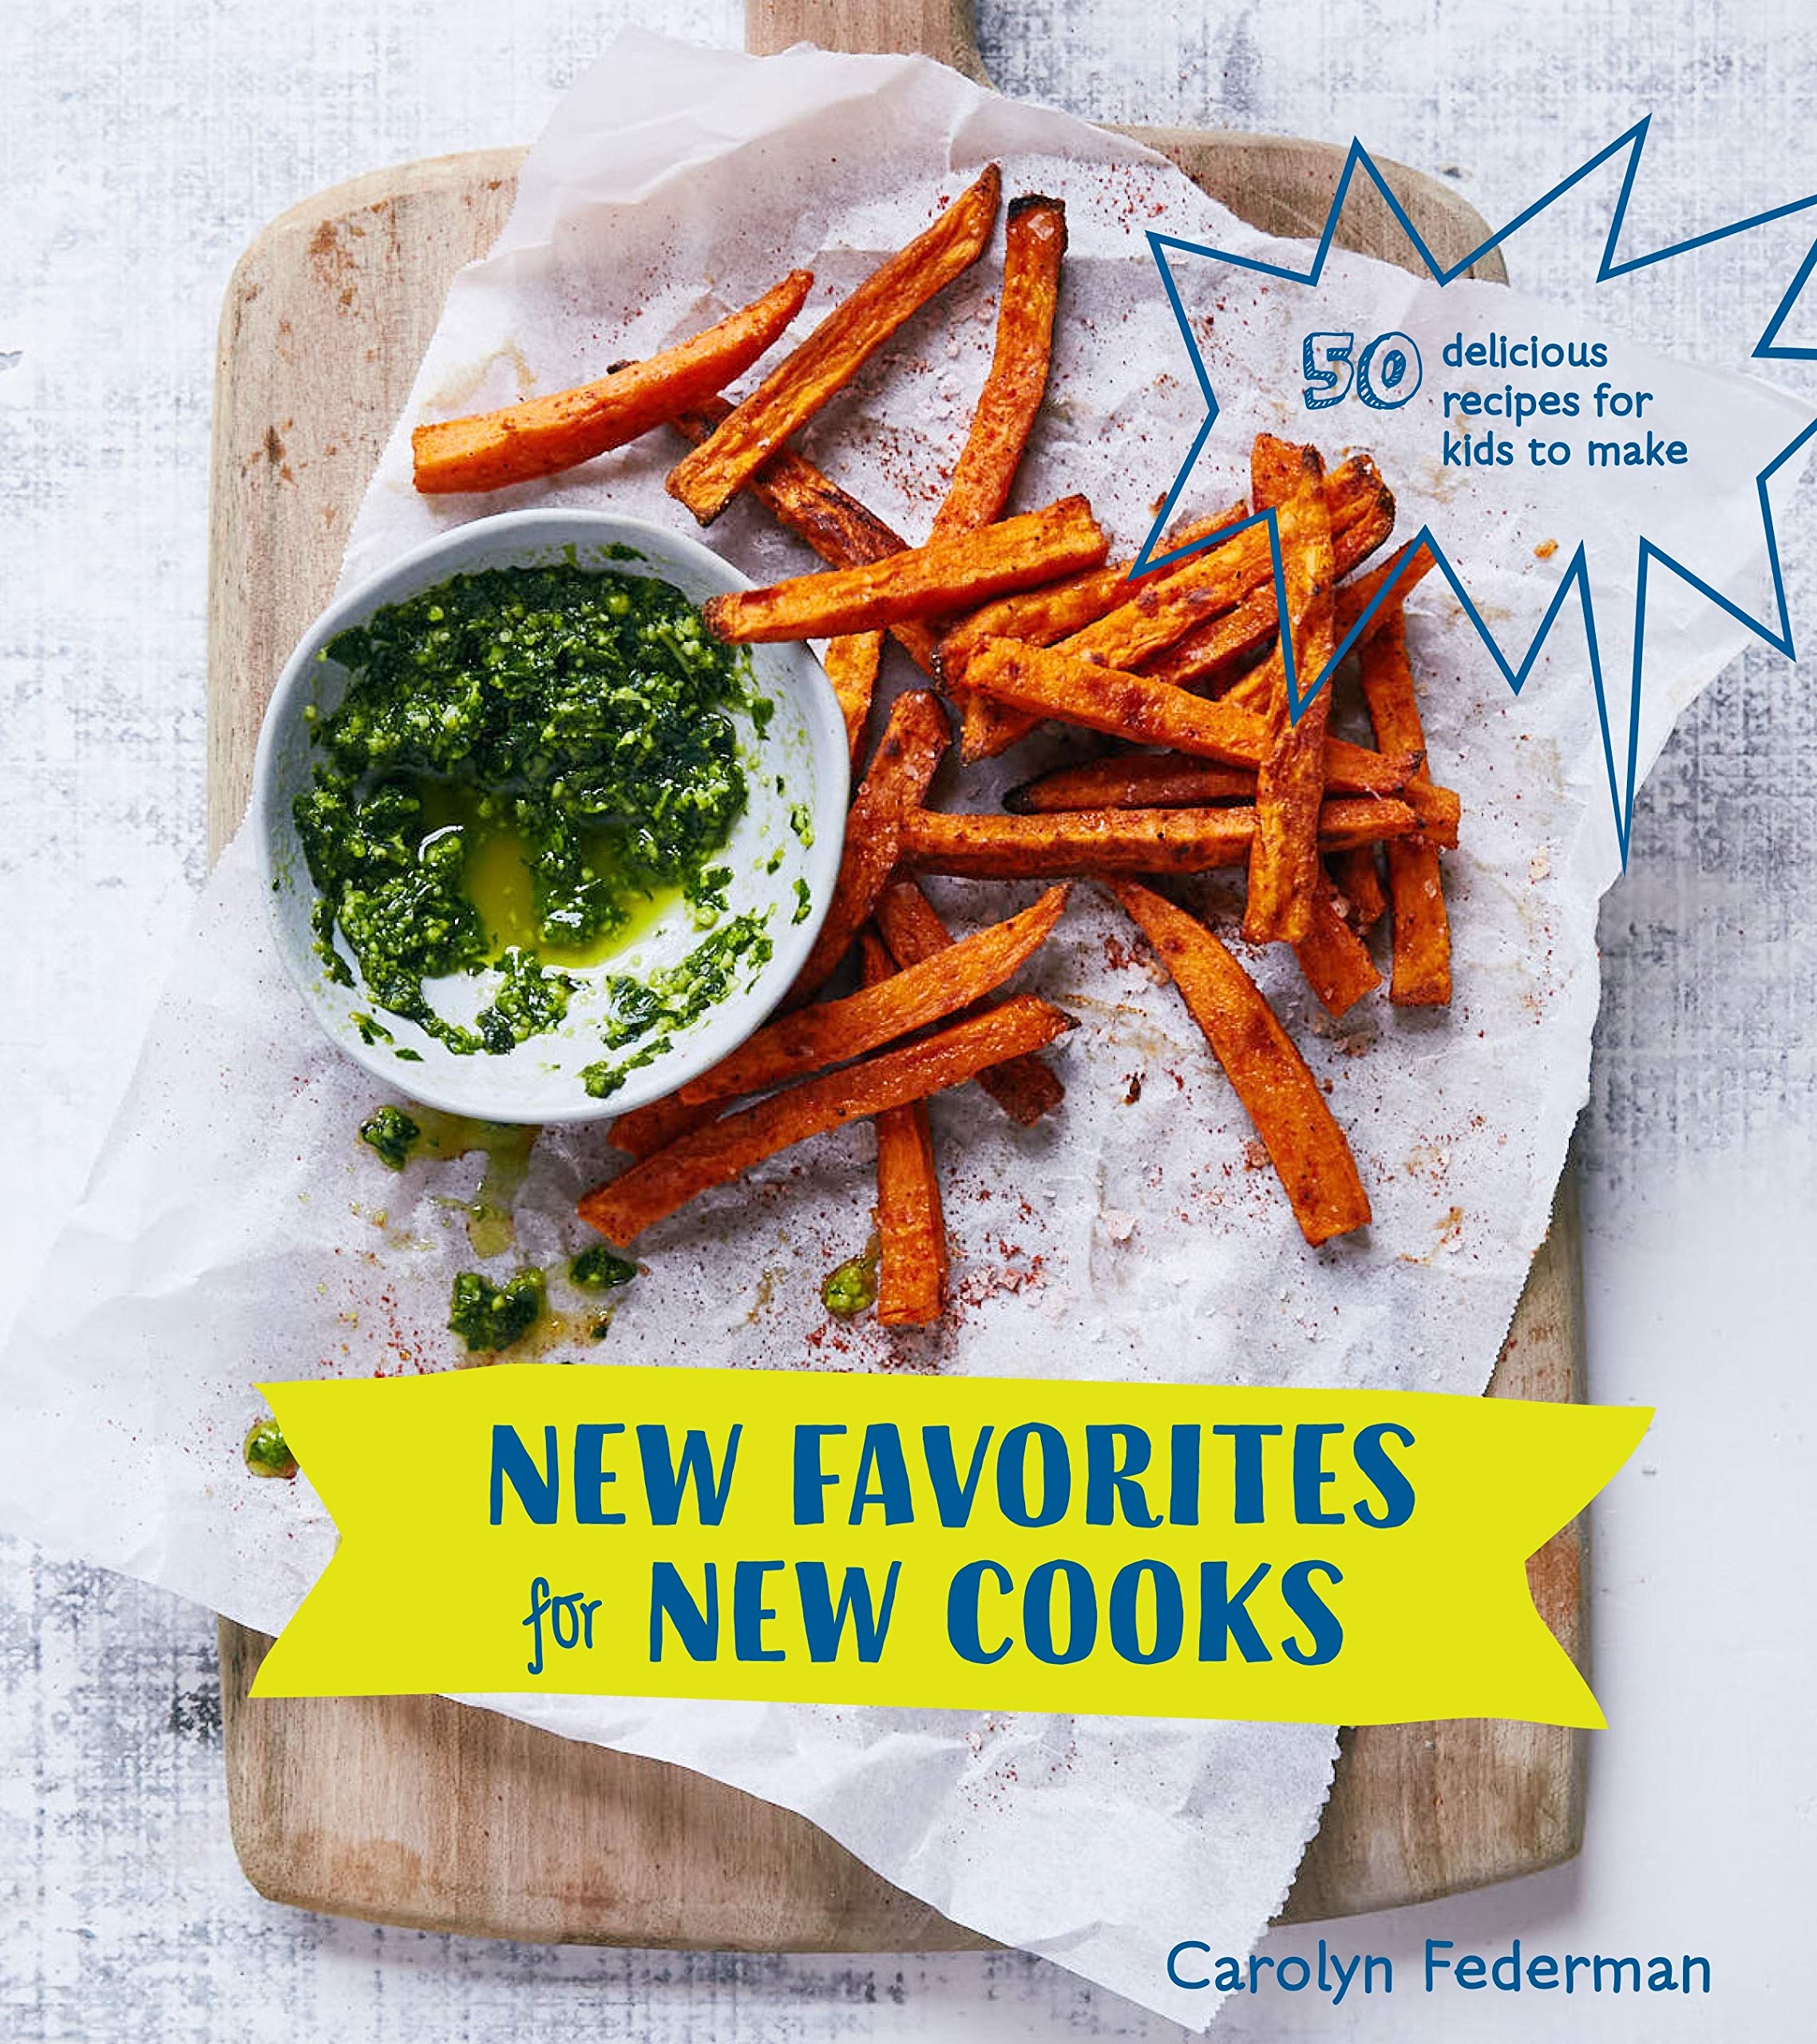 New Favorites for New Cooks: 50 Delicious Recipes for Kids to Make (Carolyn Federman)